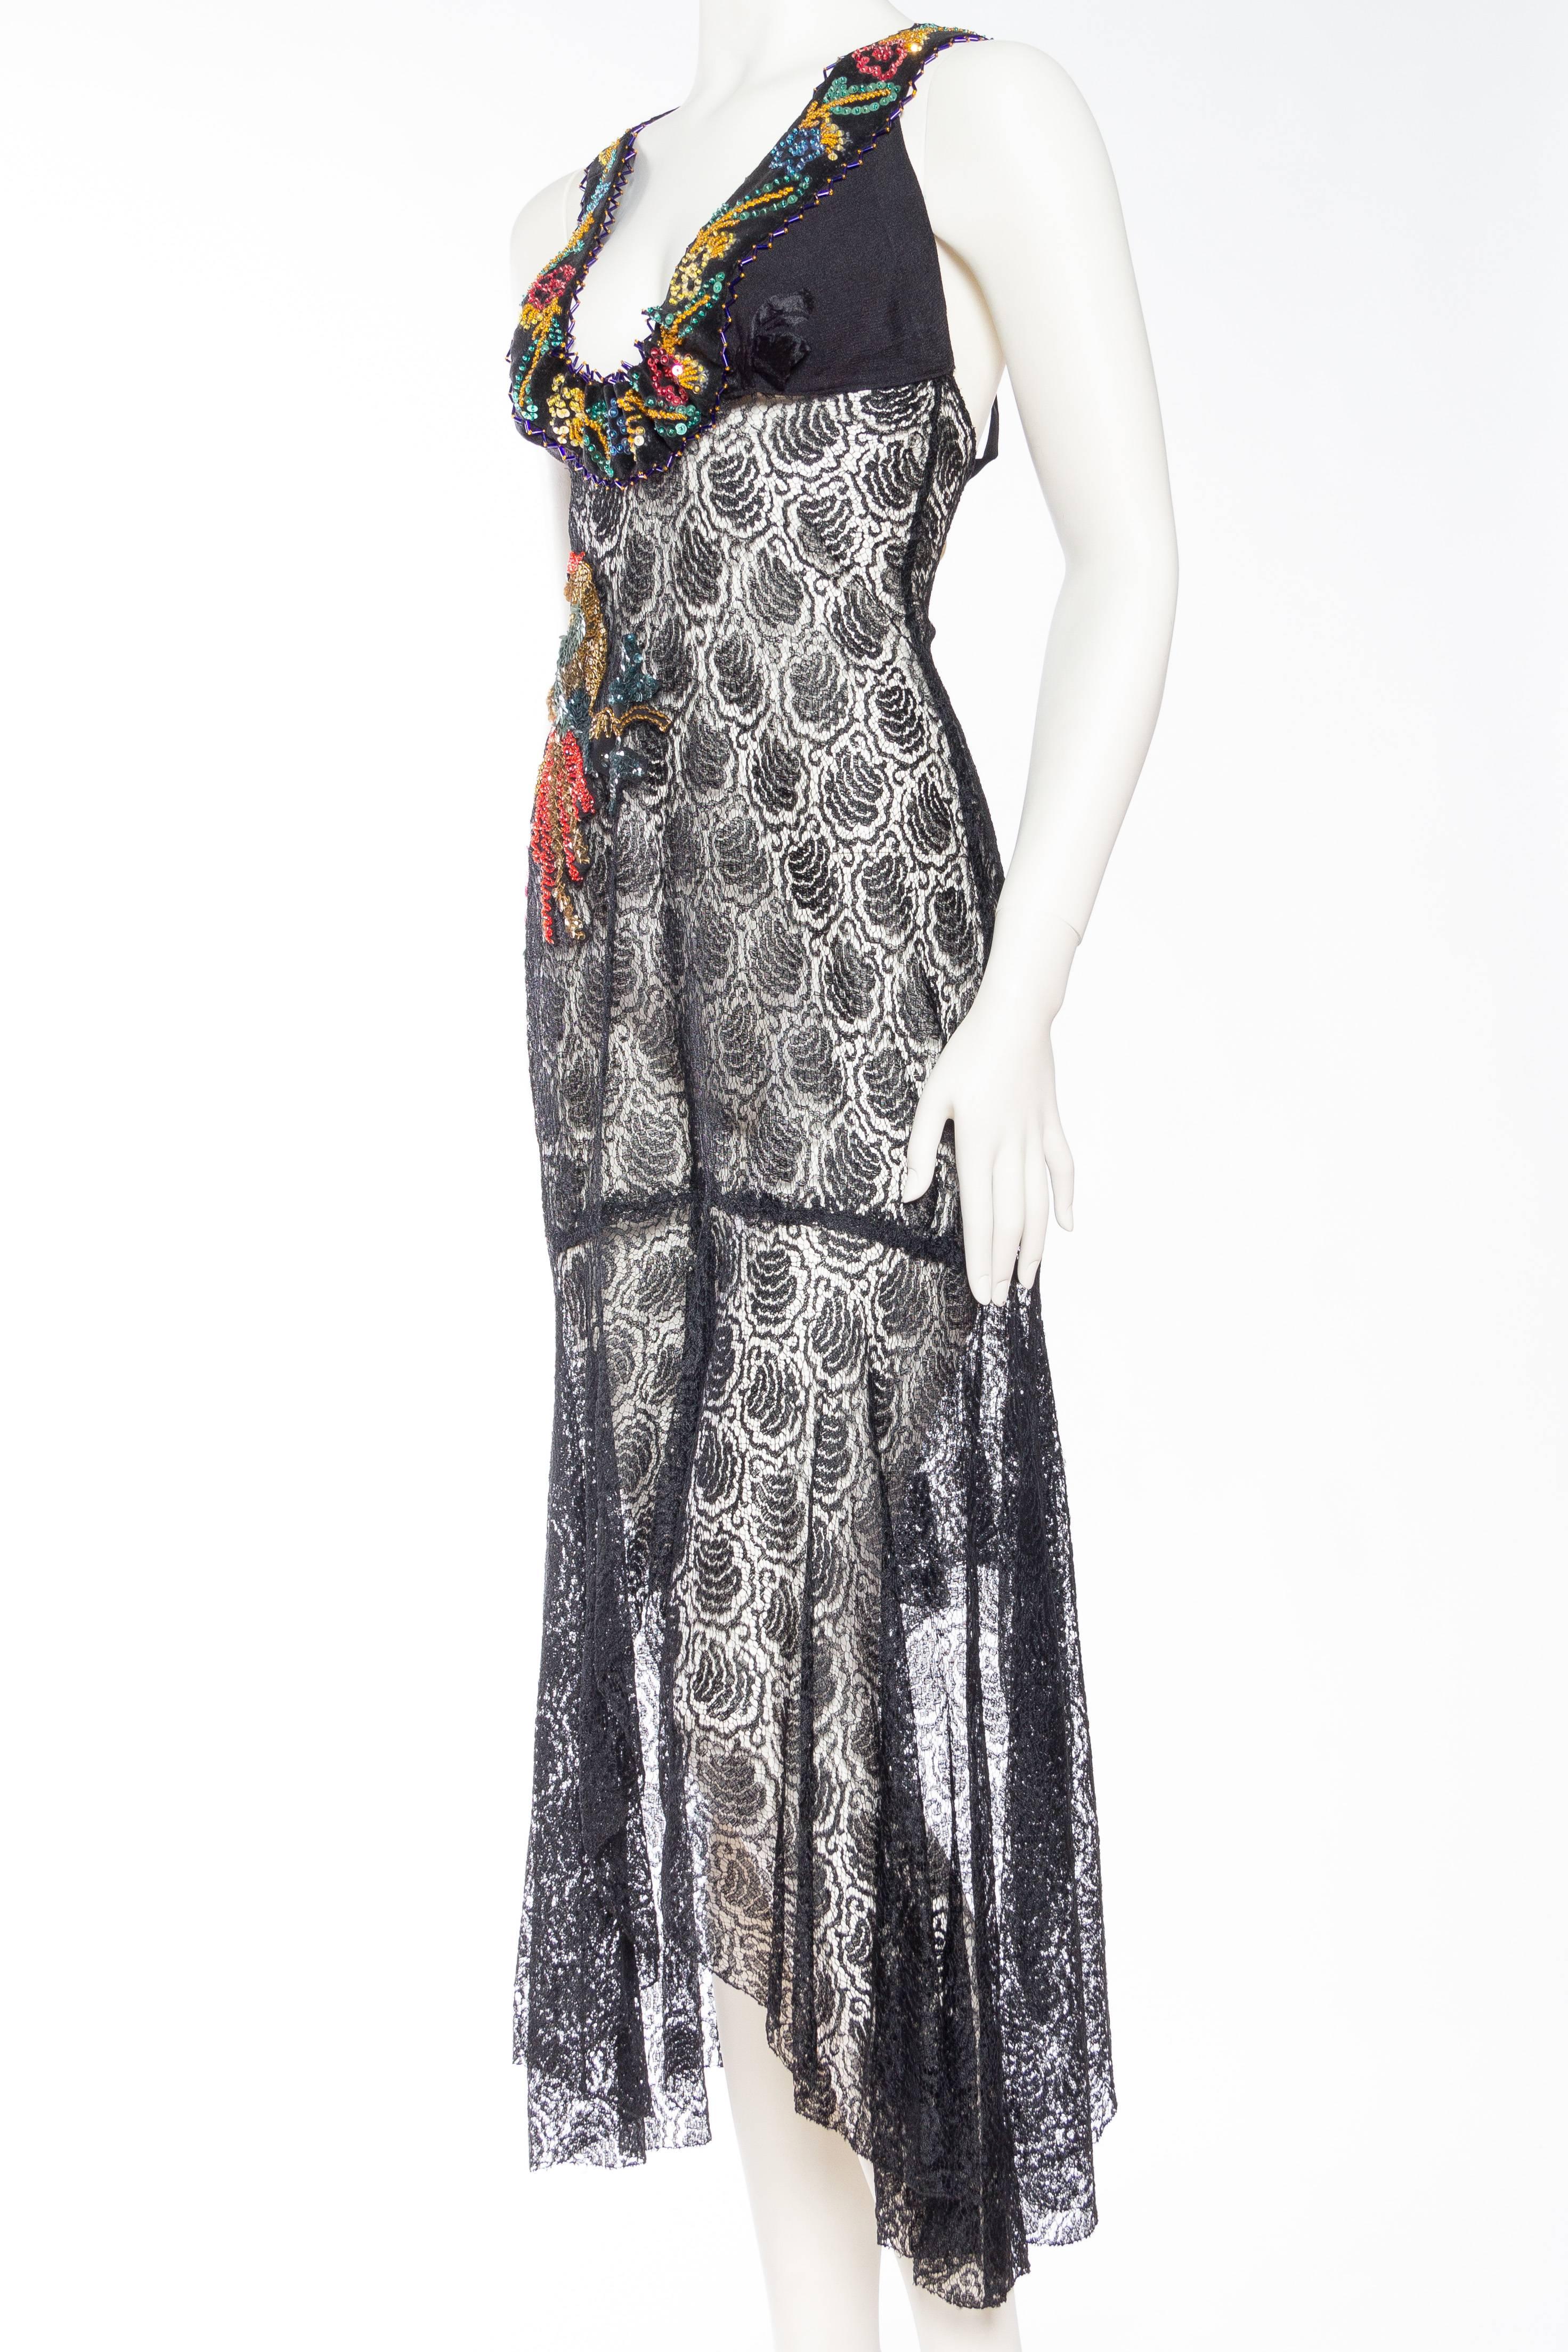 Reworked 1930s Sheer Lace Dress with Sequined Bird 1